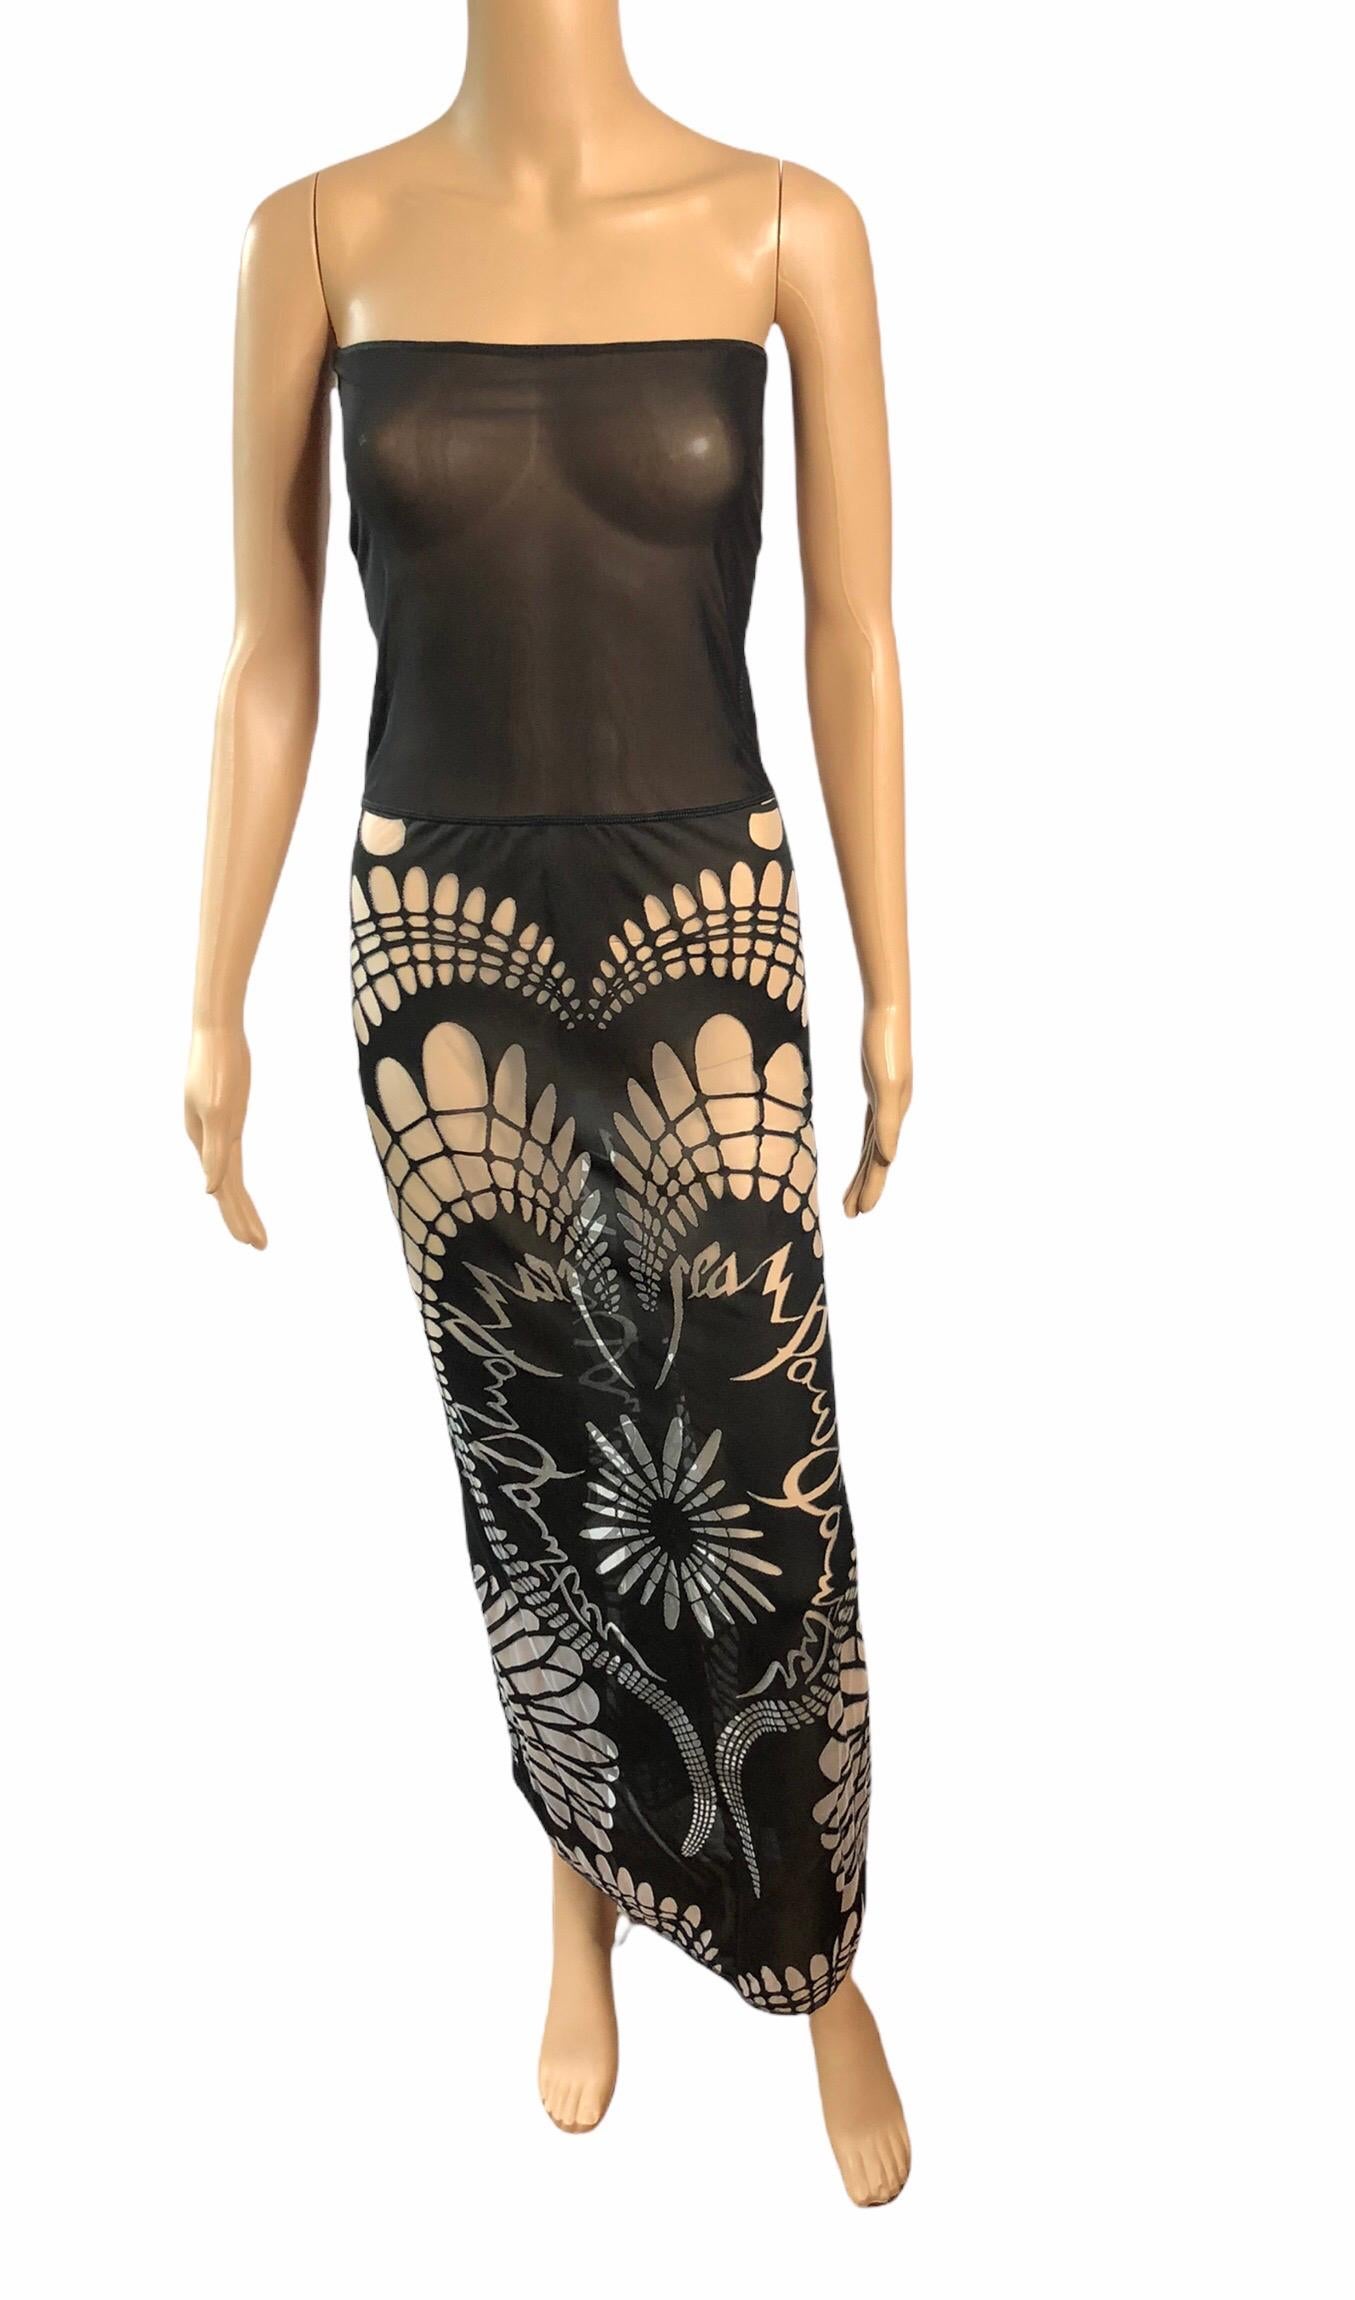 Jean Paul Gaultier Soleil S/S 2001 Logo Semi-Sheer Bodycon Mesh Maxi Skirt Dress IT 44

Please note this piece is very versatile and it could be worn as a strapless dress or a maxi skirt as shown in the photos.